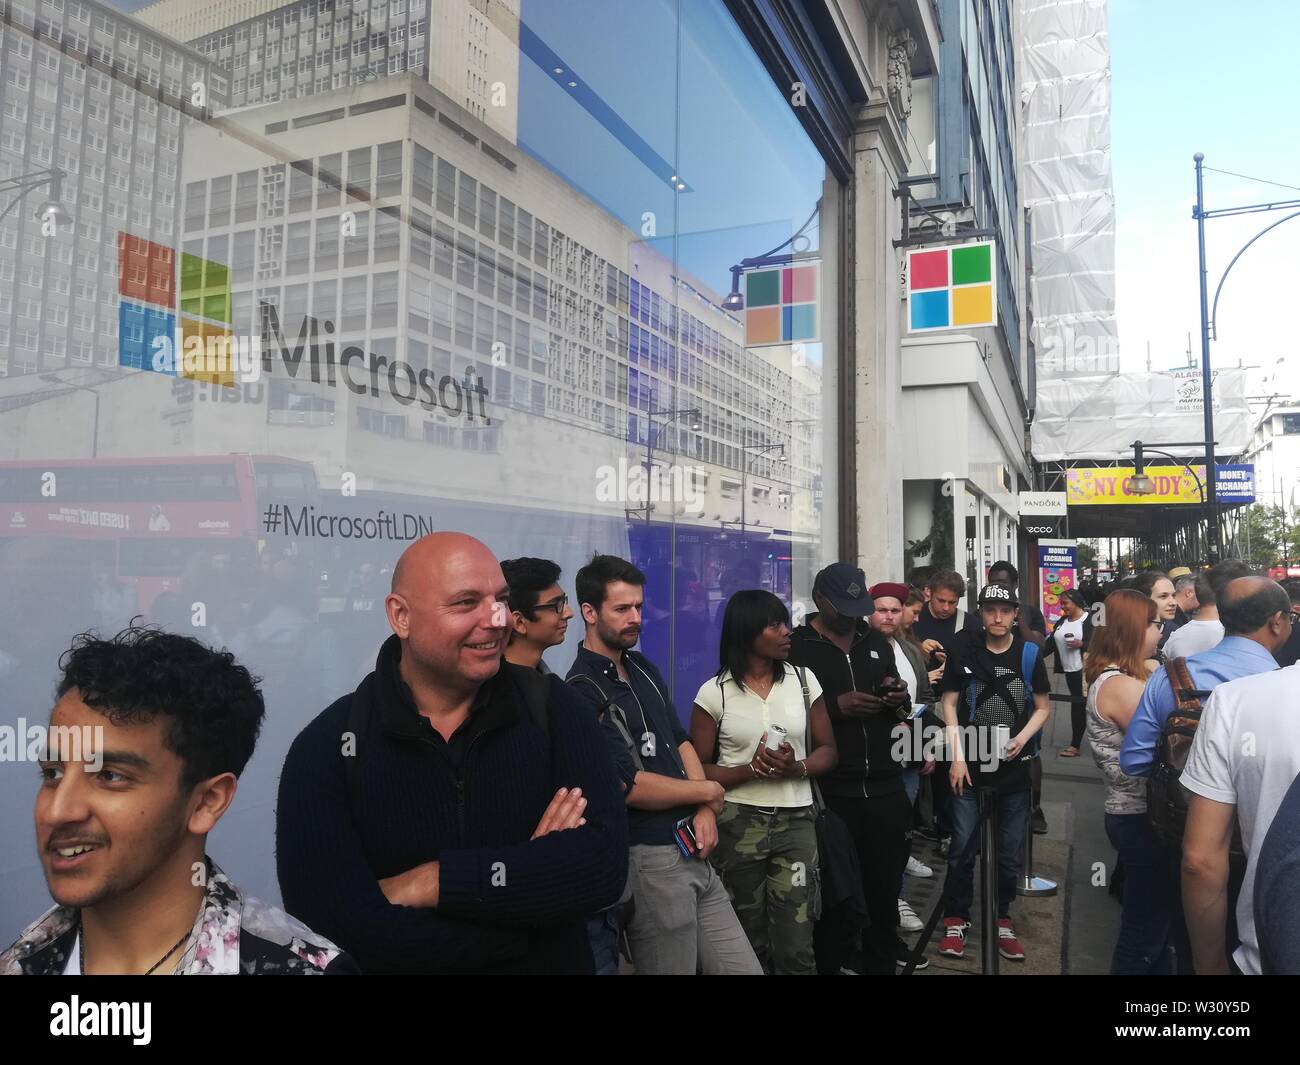 First European Microsoft store opens on Oxford circus in London, UK Stock Photo